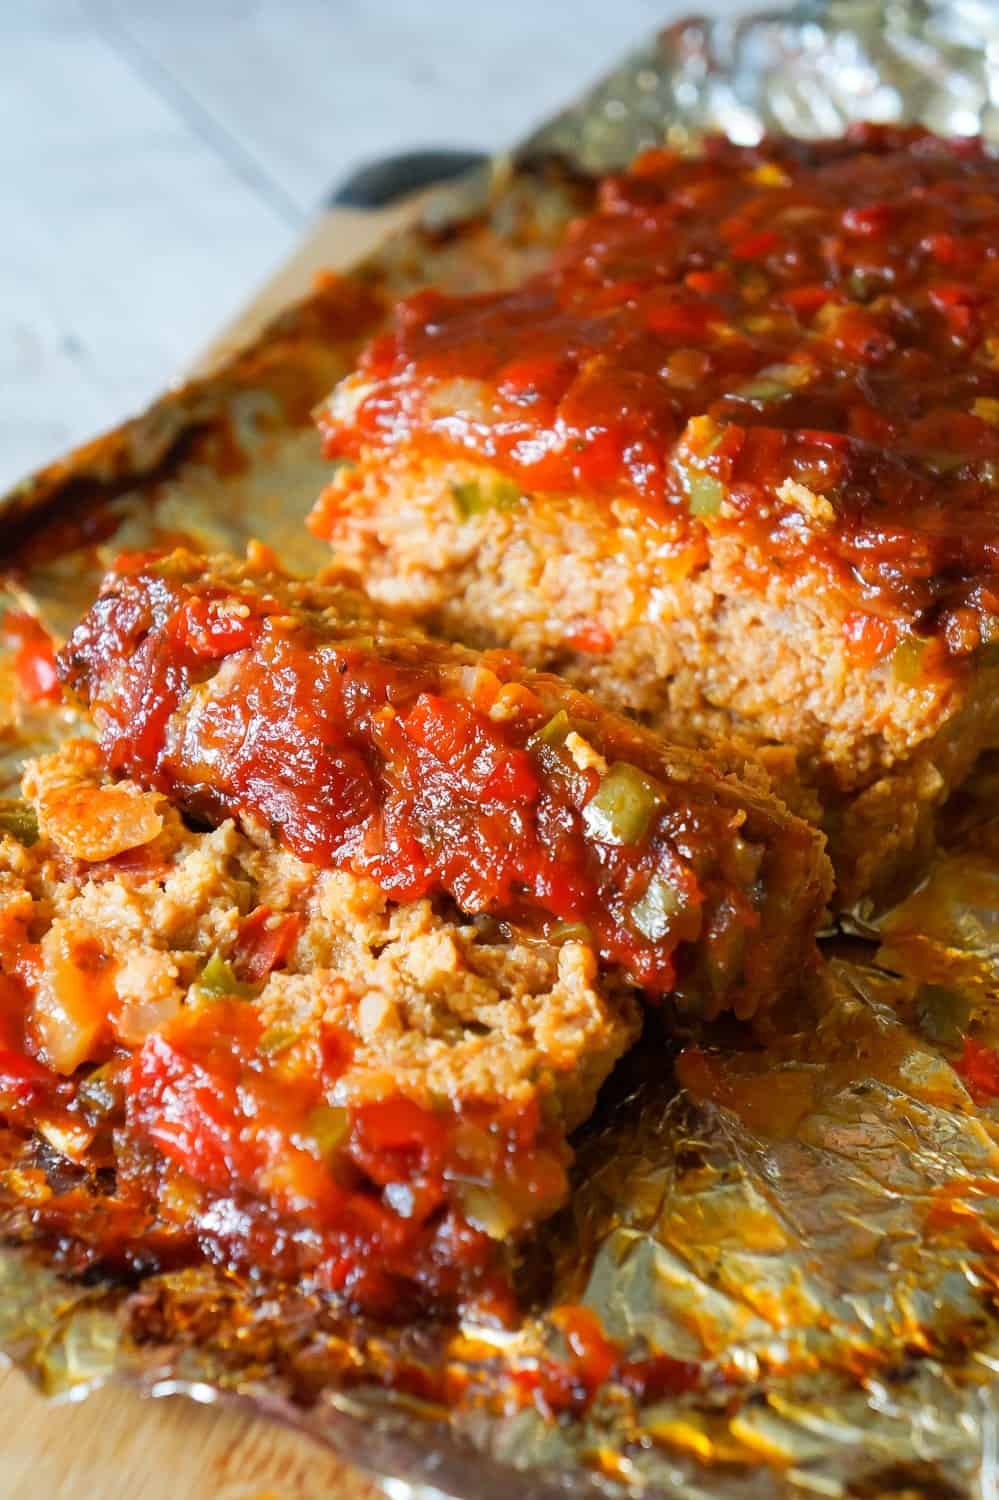 Sausage and Peppers Meatloaf is an easy meatloaf recipe using two pounds of mild Italian sausage meat and loaded with diced green peppers, red peppers and onions all in a sweet and spicy tomato sauce.